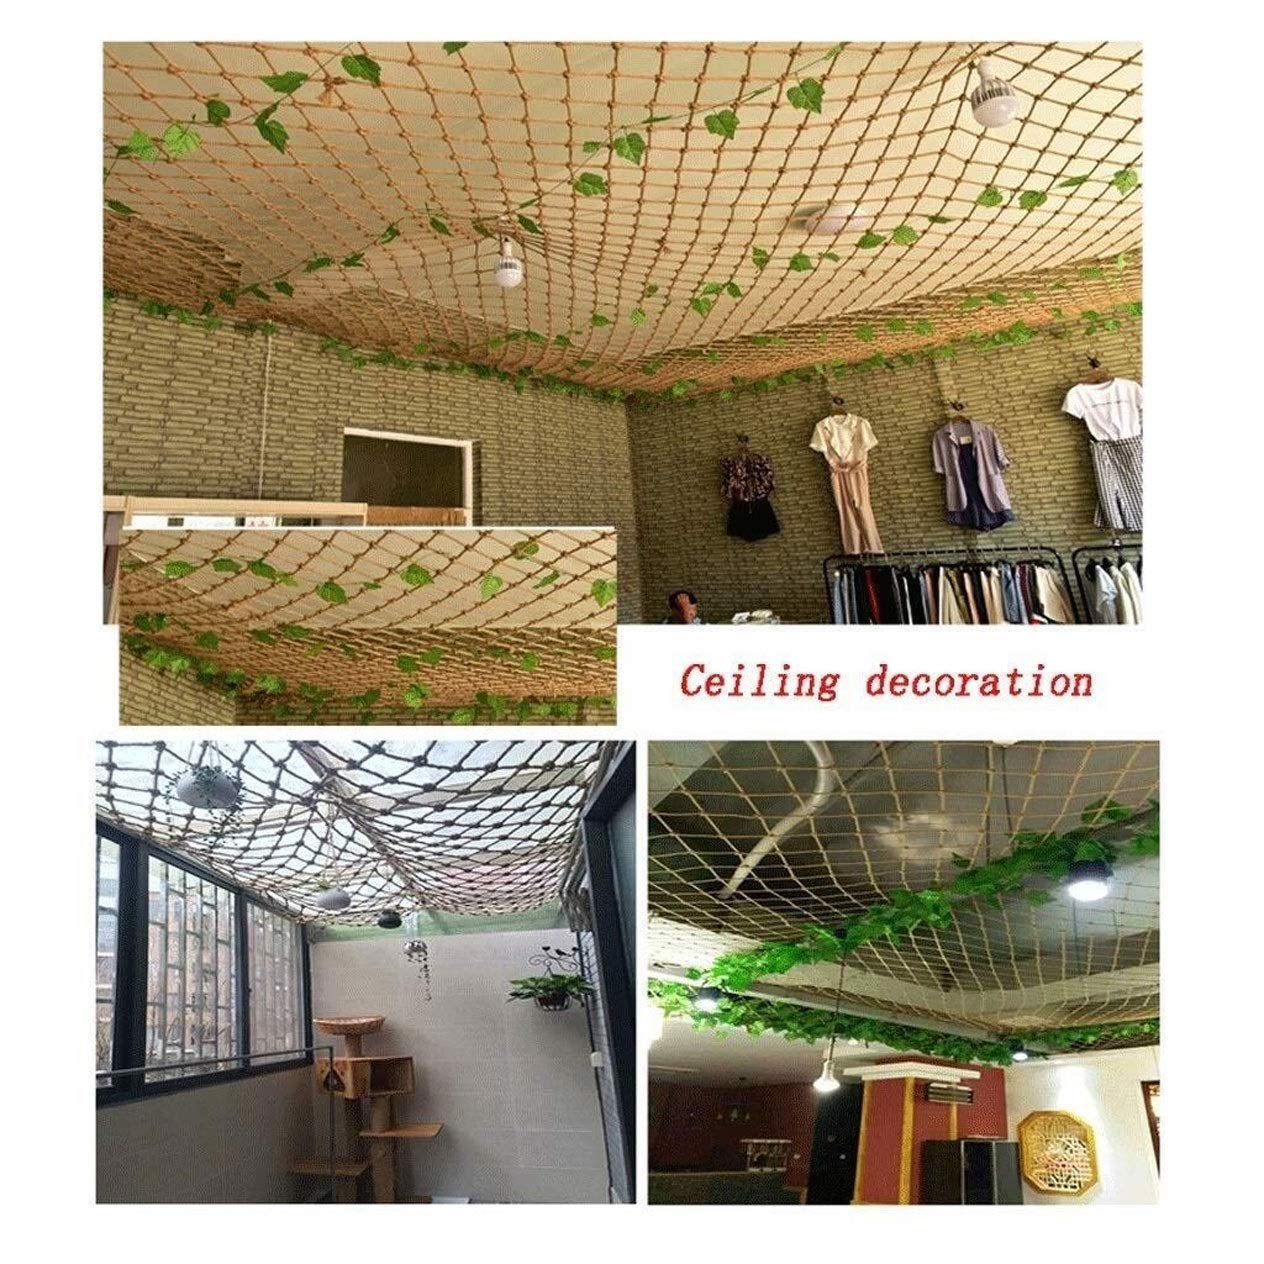 RZM Balcony Safety Net, Hemp Rope Net, Children's Stairs Antifall Fence Fence Net Decoration Net Climbing Net Restaurant Bar Ceiling Net Hanging Clothes Net Protective Safety Rope Net Decor Mesh child